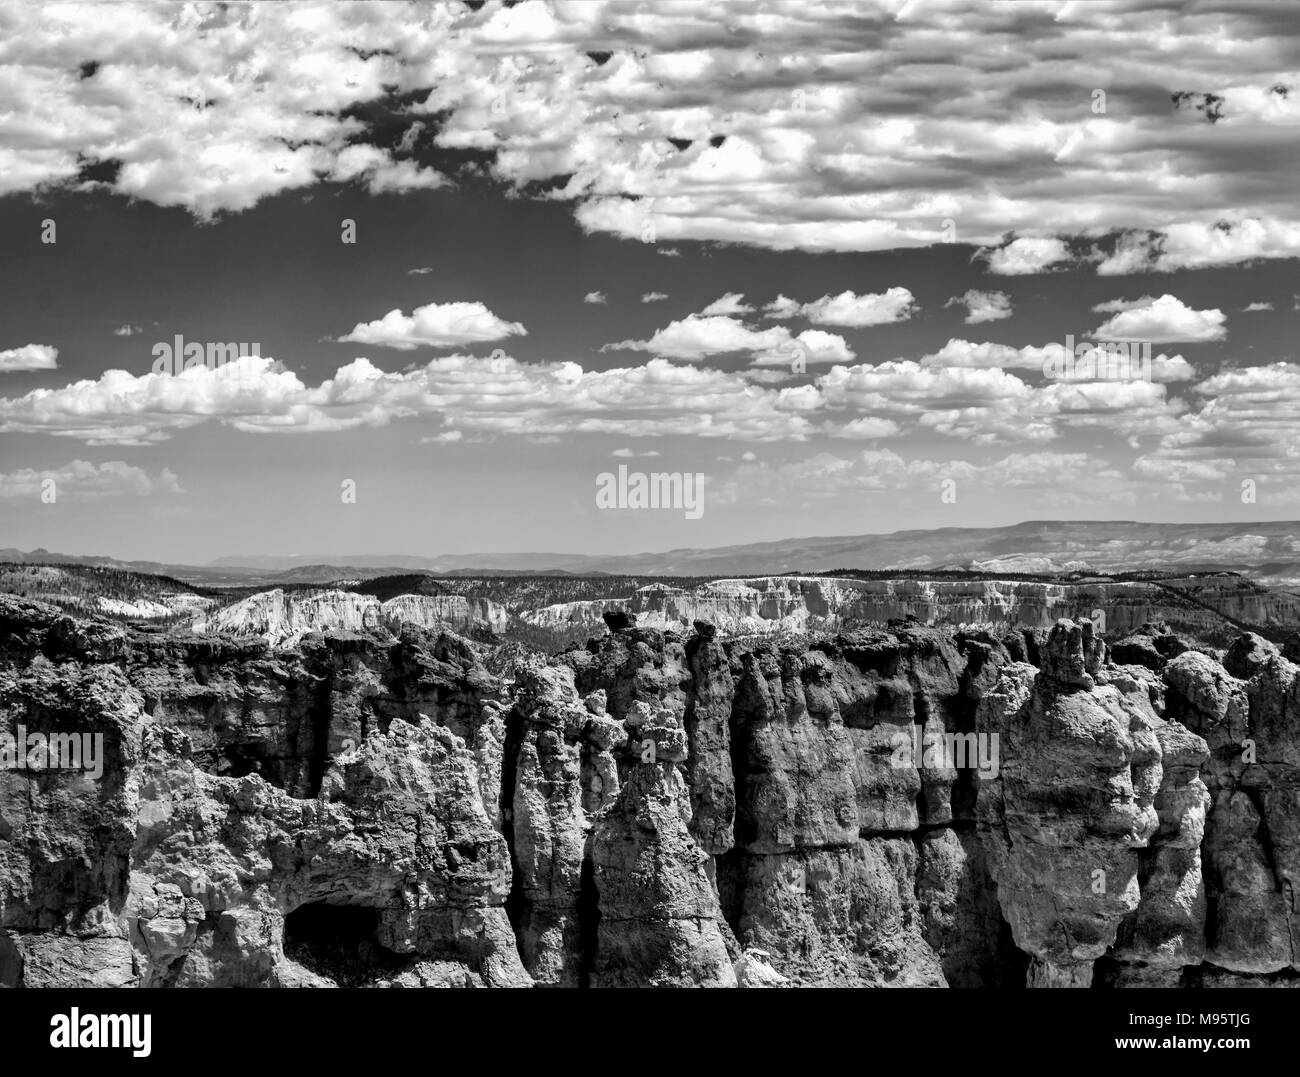 View of sandstone rock formations, cliffs snd steep hillsides under sky with white fluffy clouds. Stock Photo